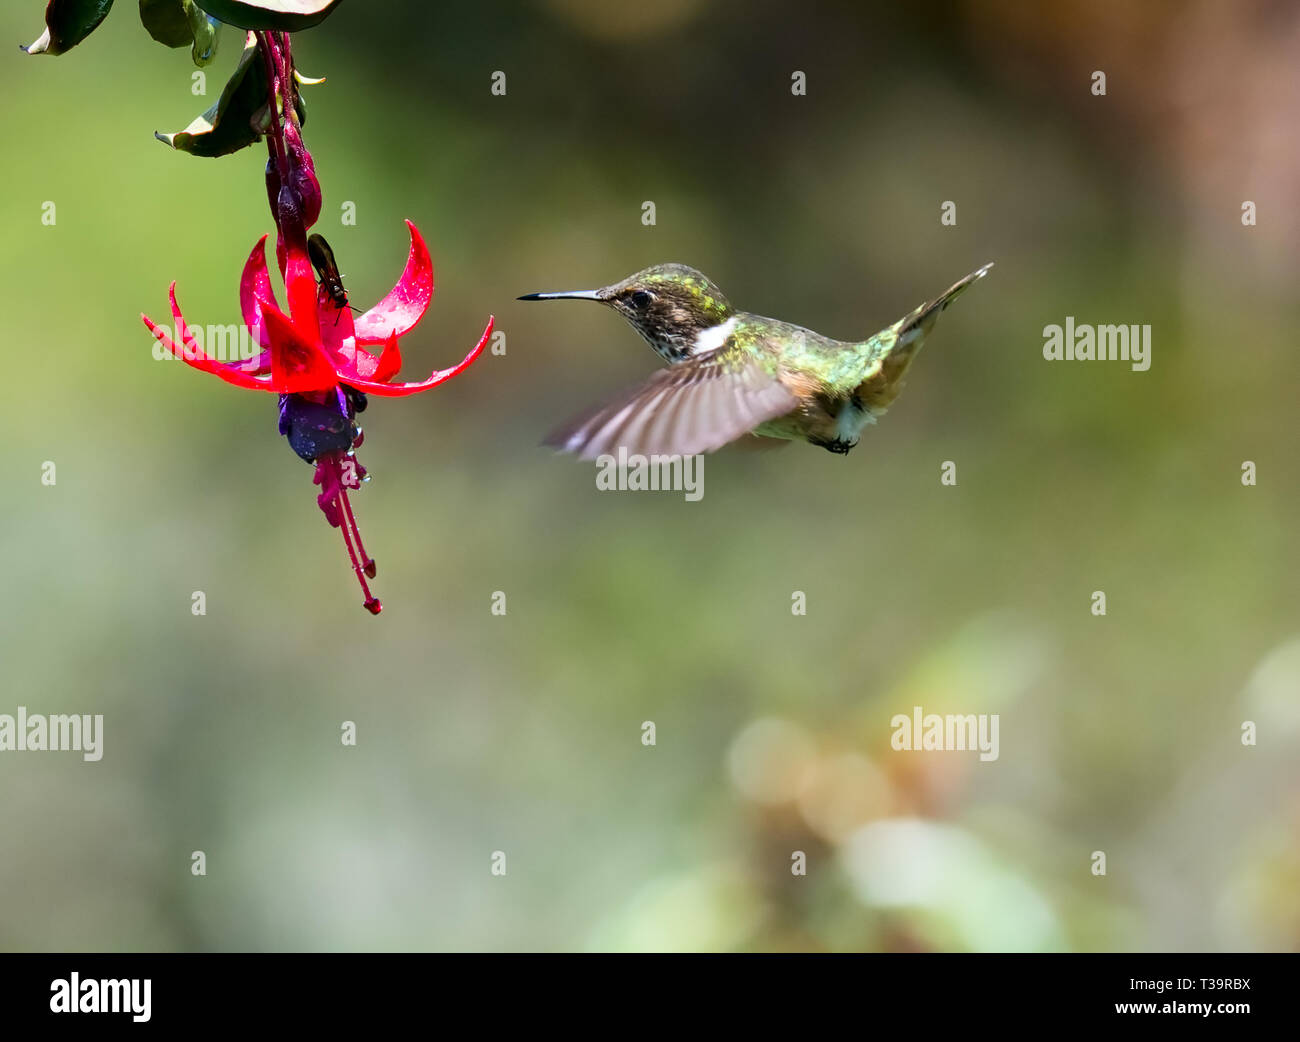 The tiny size and dull coloring identify this hummingbird as a Green-crowned Brilliant female as seen moving into drink nectar from a pink and purple  Stock Photo